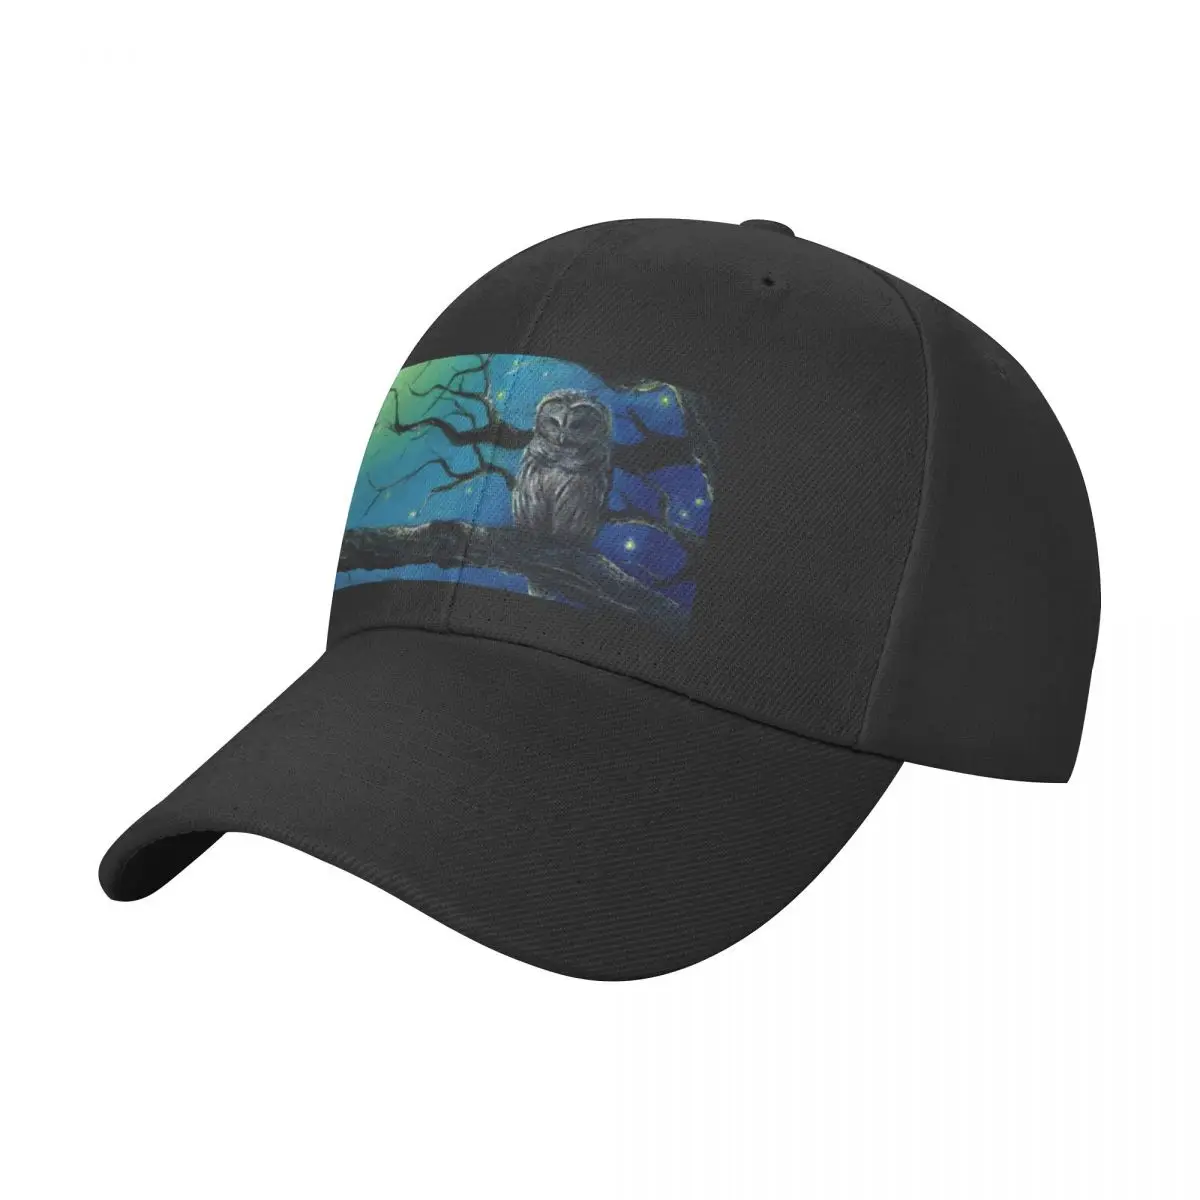 

Starry Owl - Acrylic Painting of a Magical Night Baseball Cap Beach Outing Hip Hop Rave Hat For Man Women's